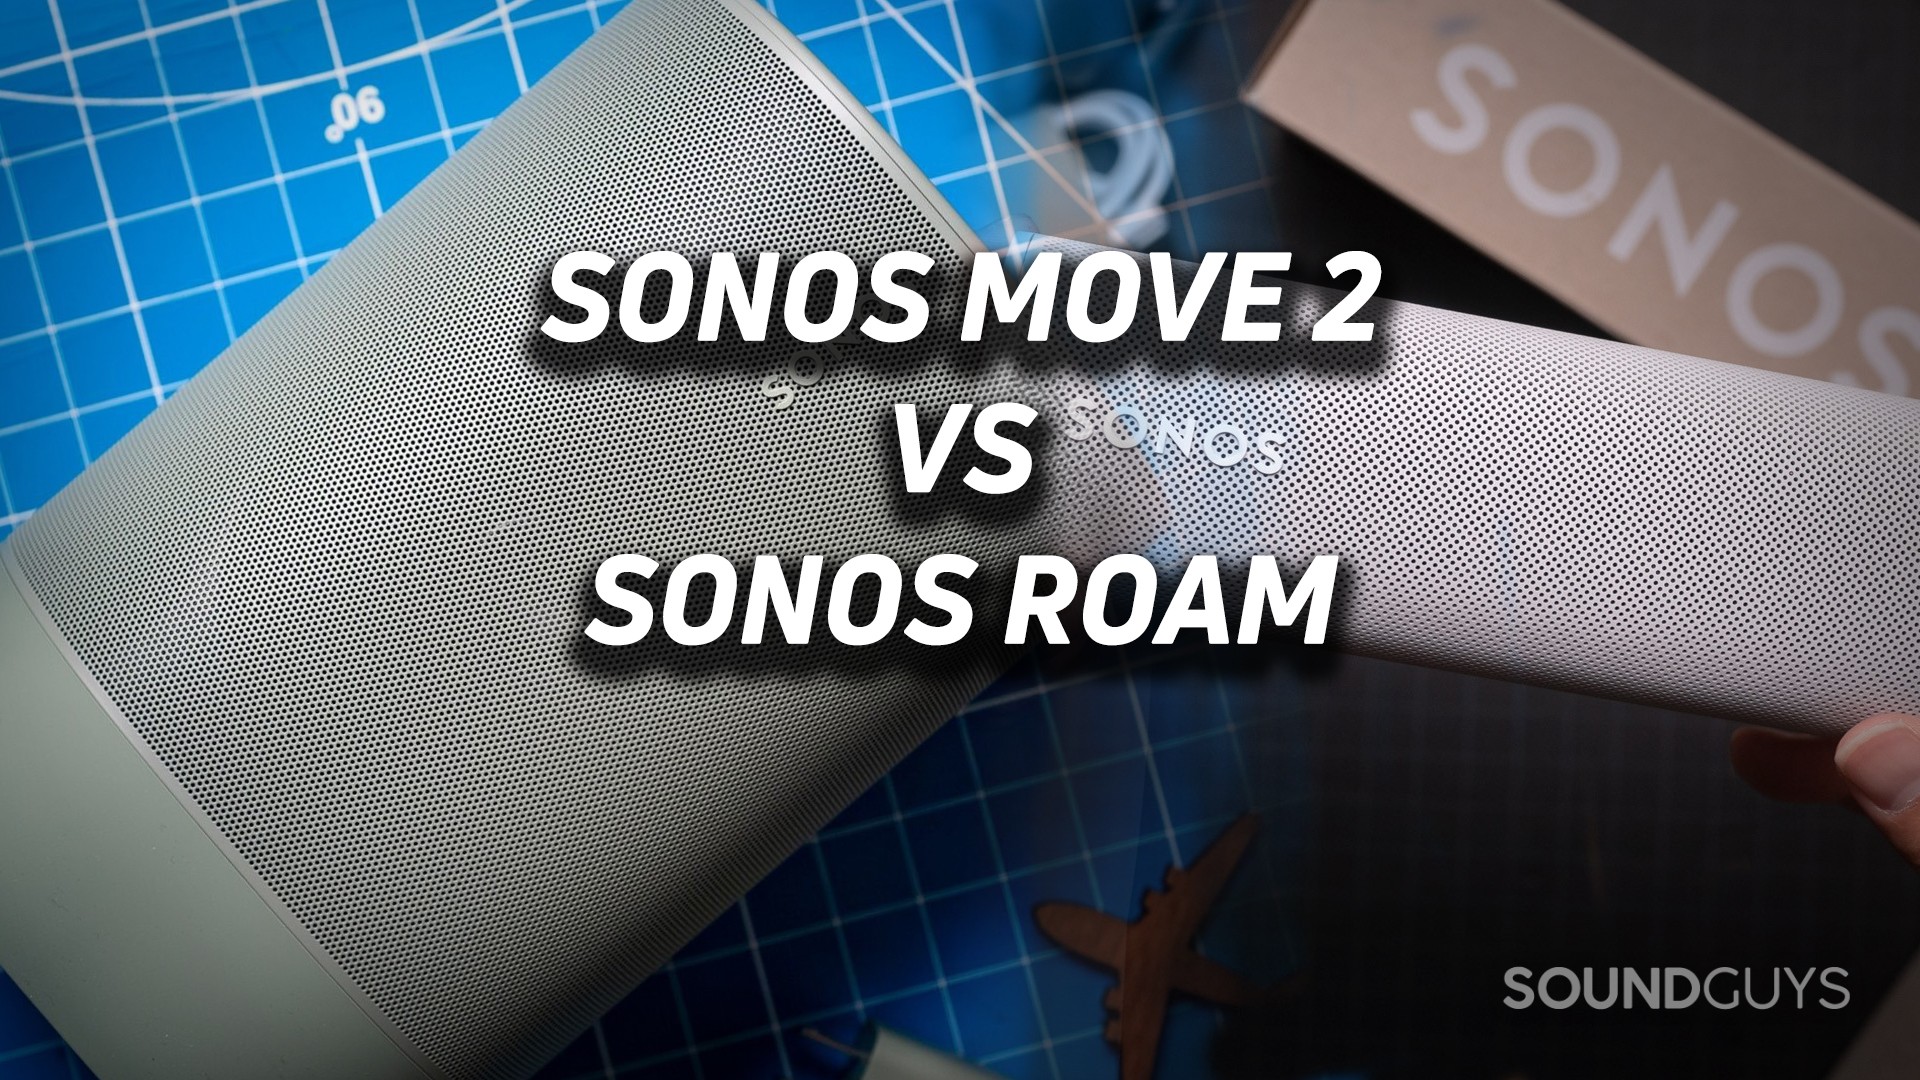 Two overlapping images show the Sonos Move 2 and the Sonos Roam with text over top.